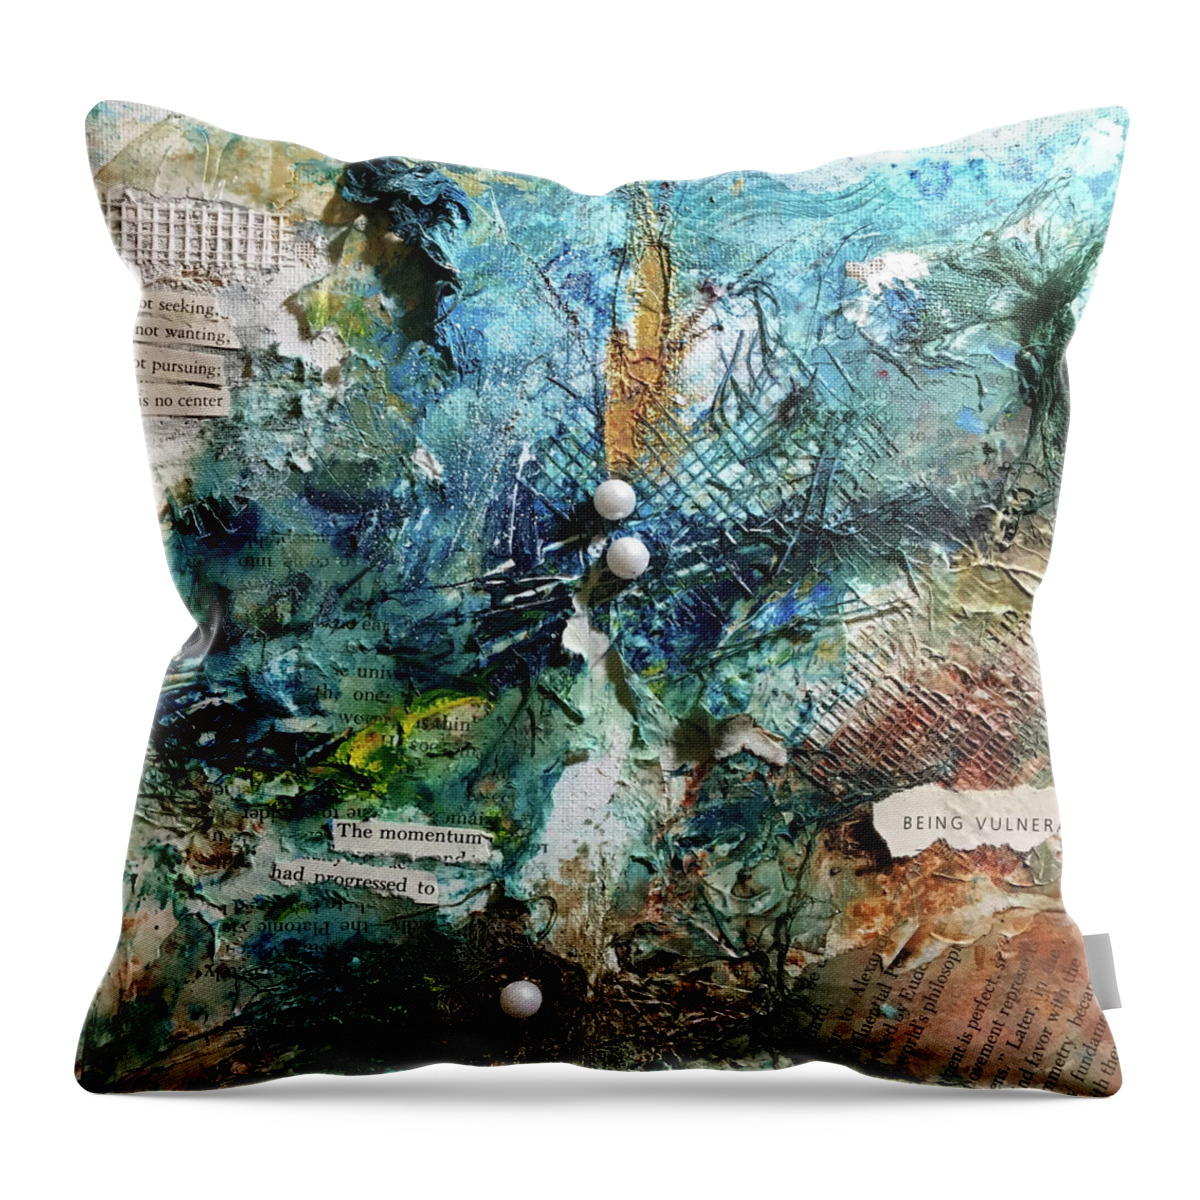 Abstract Art Throw Pillow featuring the painting Culling Overture by Rodney Frederickson